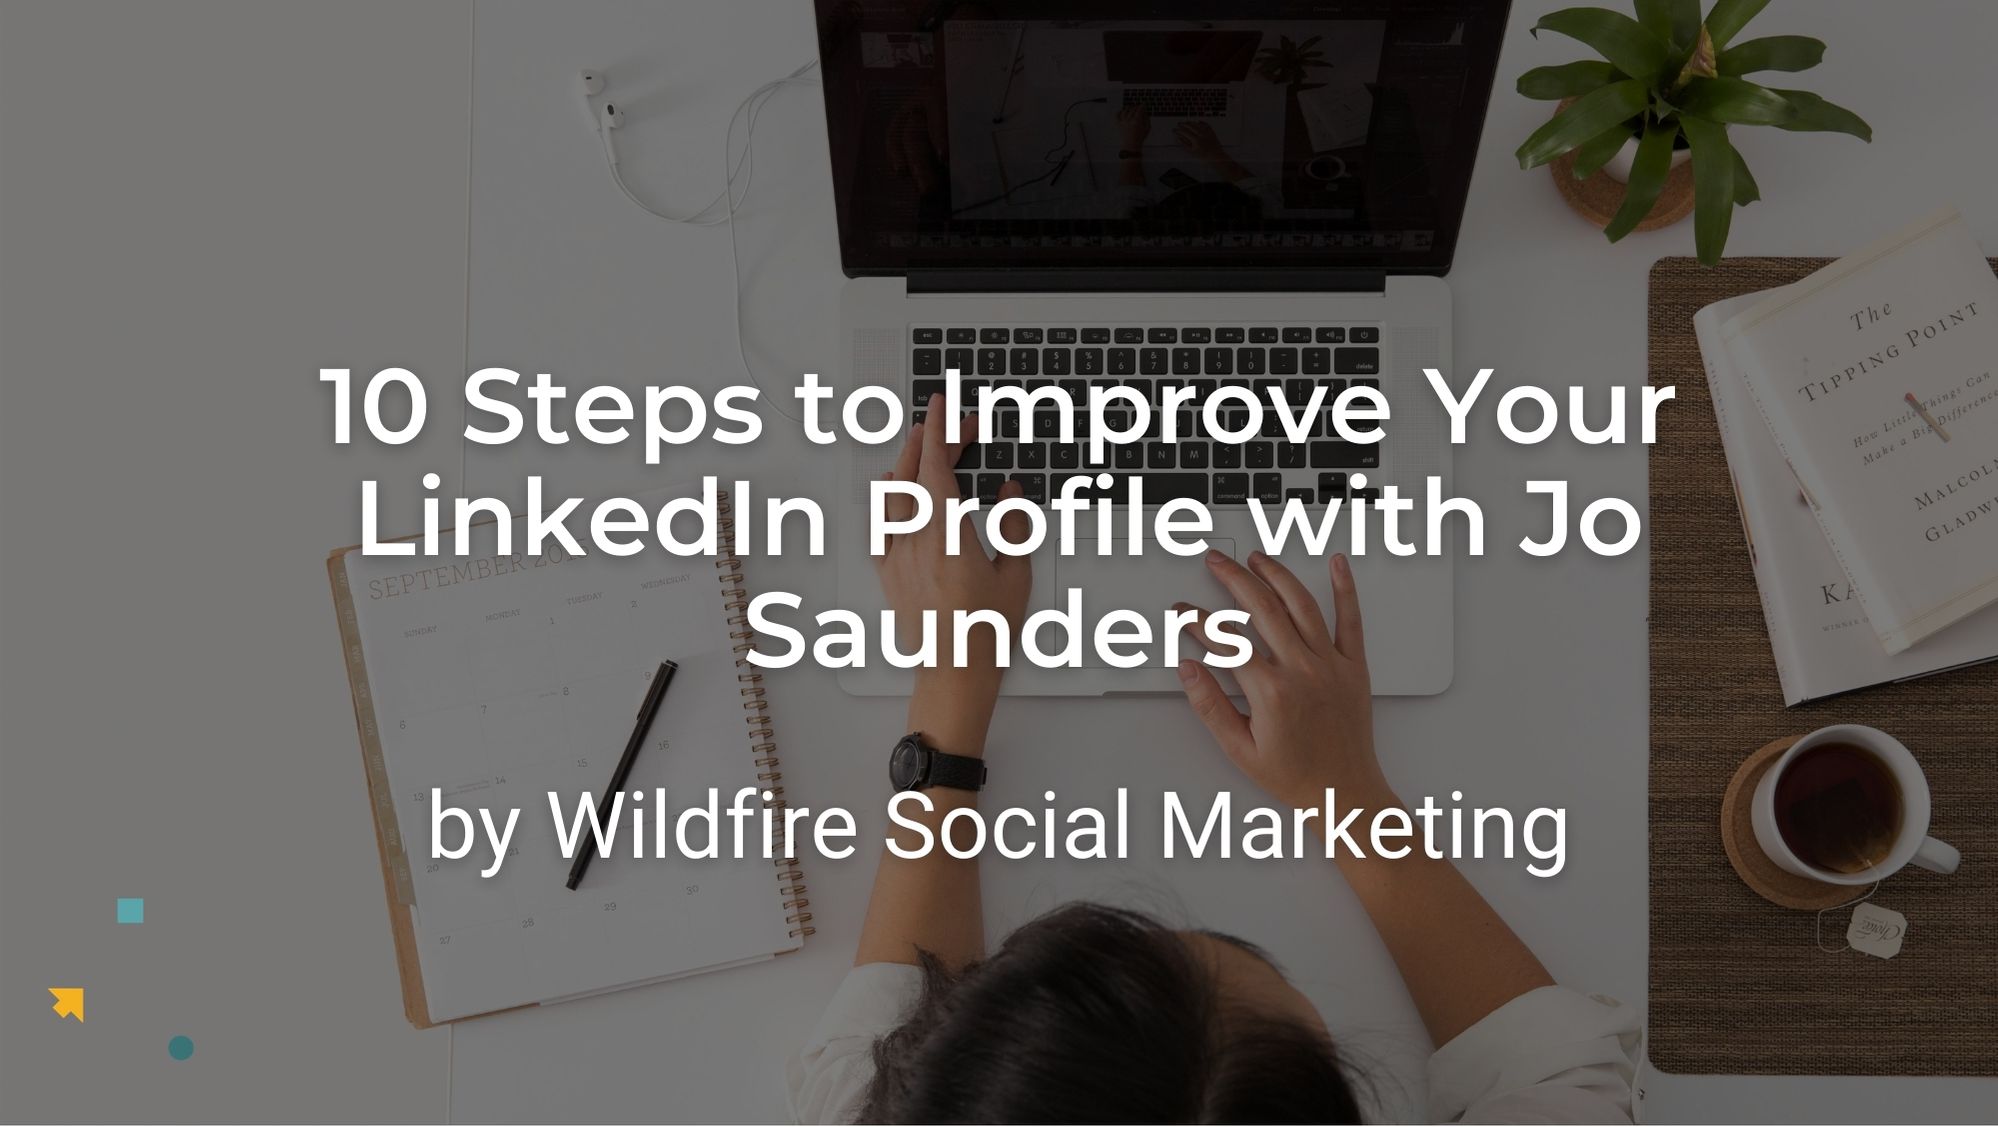 10 Steps to improve your LinkedIn profile with Jo Saunders